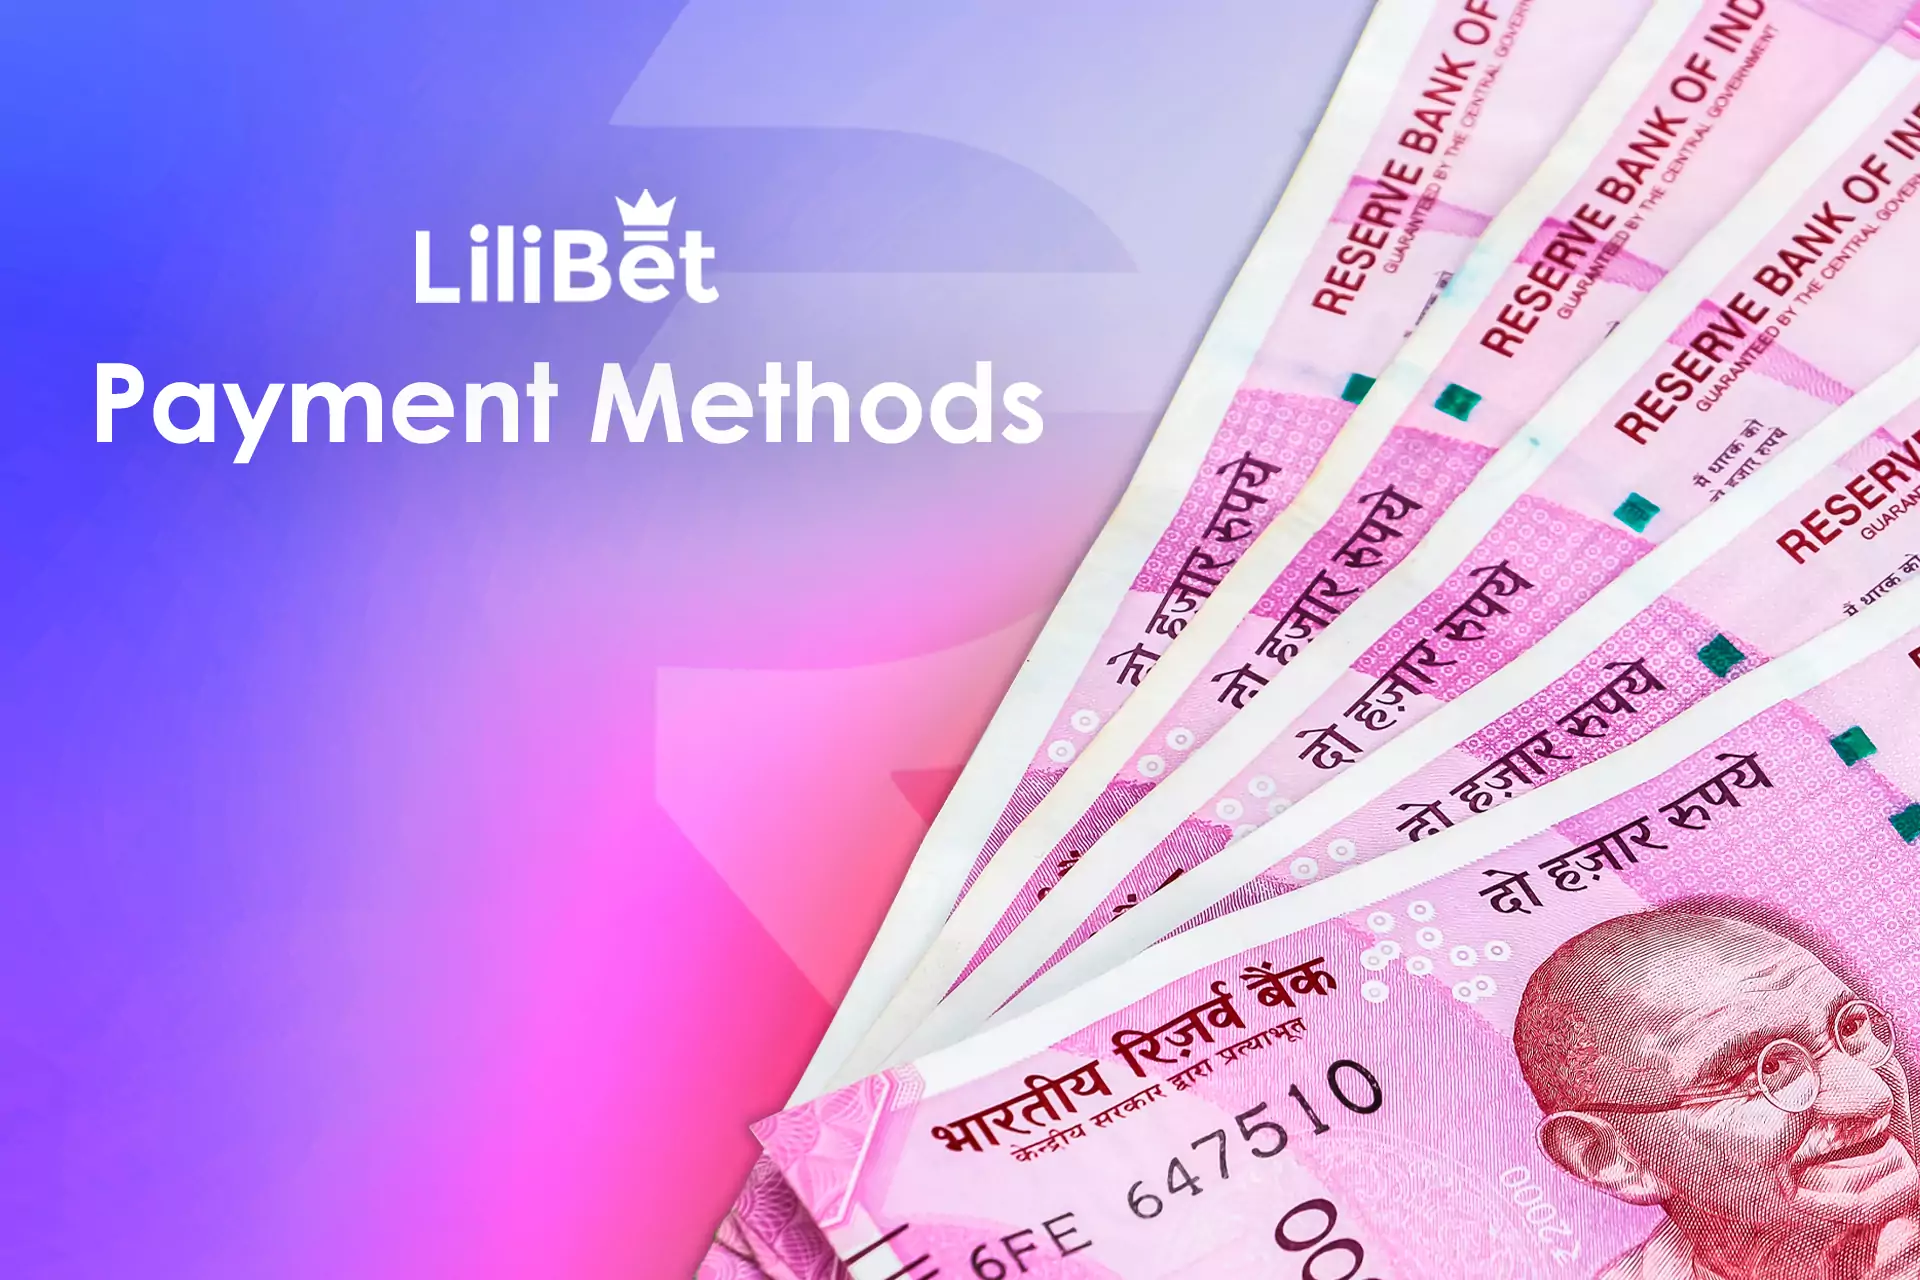 Before placing bets you have to top up your Lilibet account.